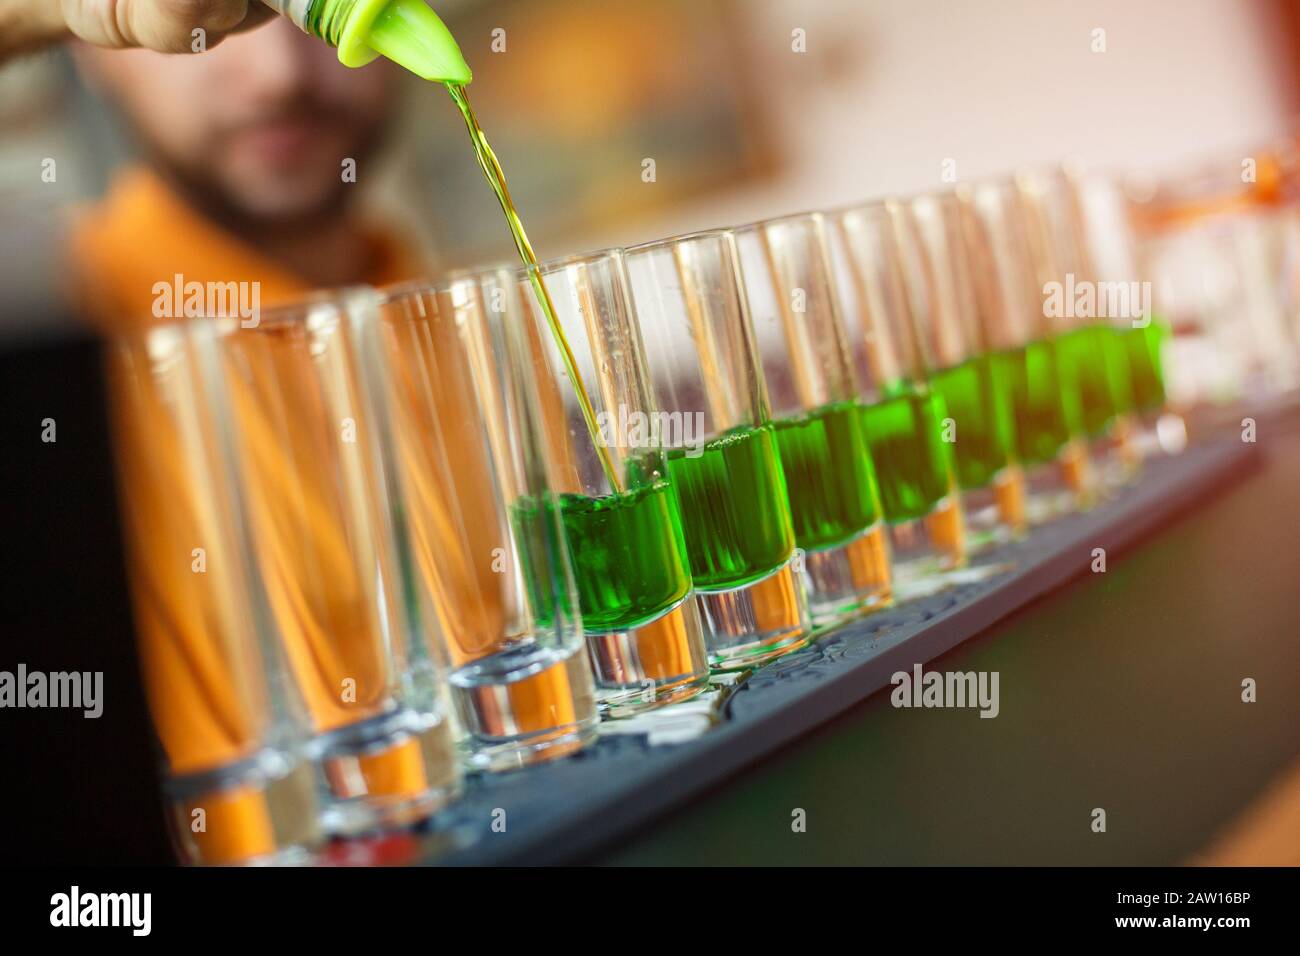 Bartender pouring absinthe in a glass. Concept of elite alcohol. Stock Photo